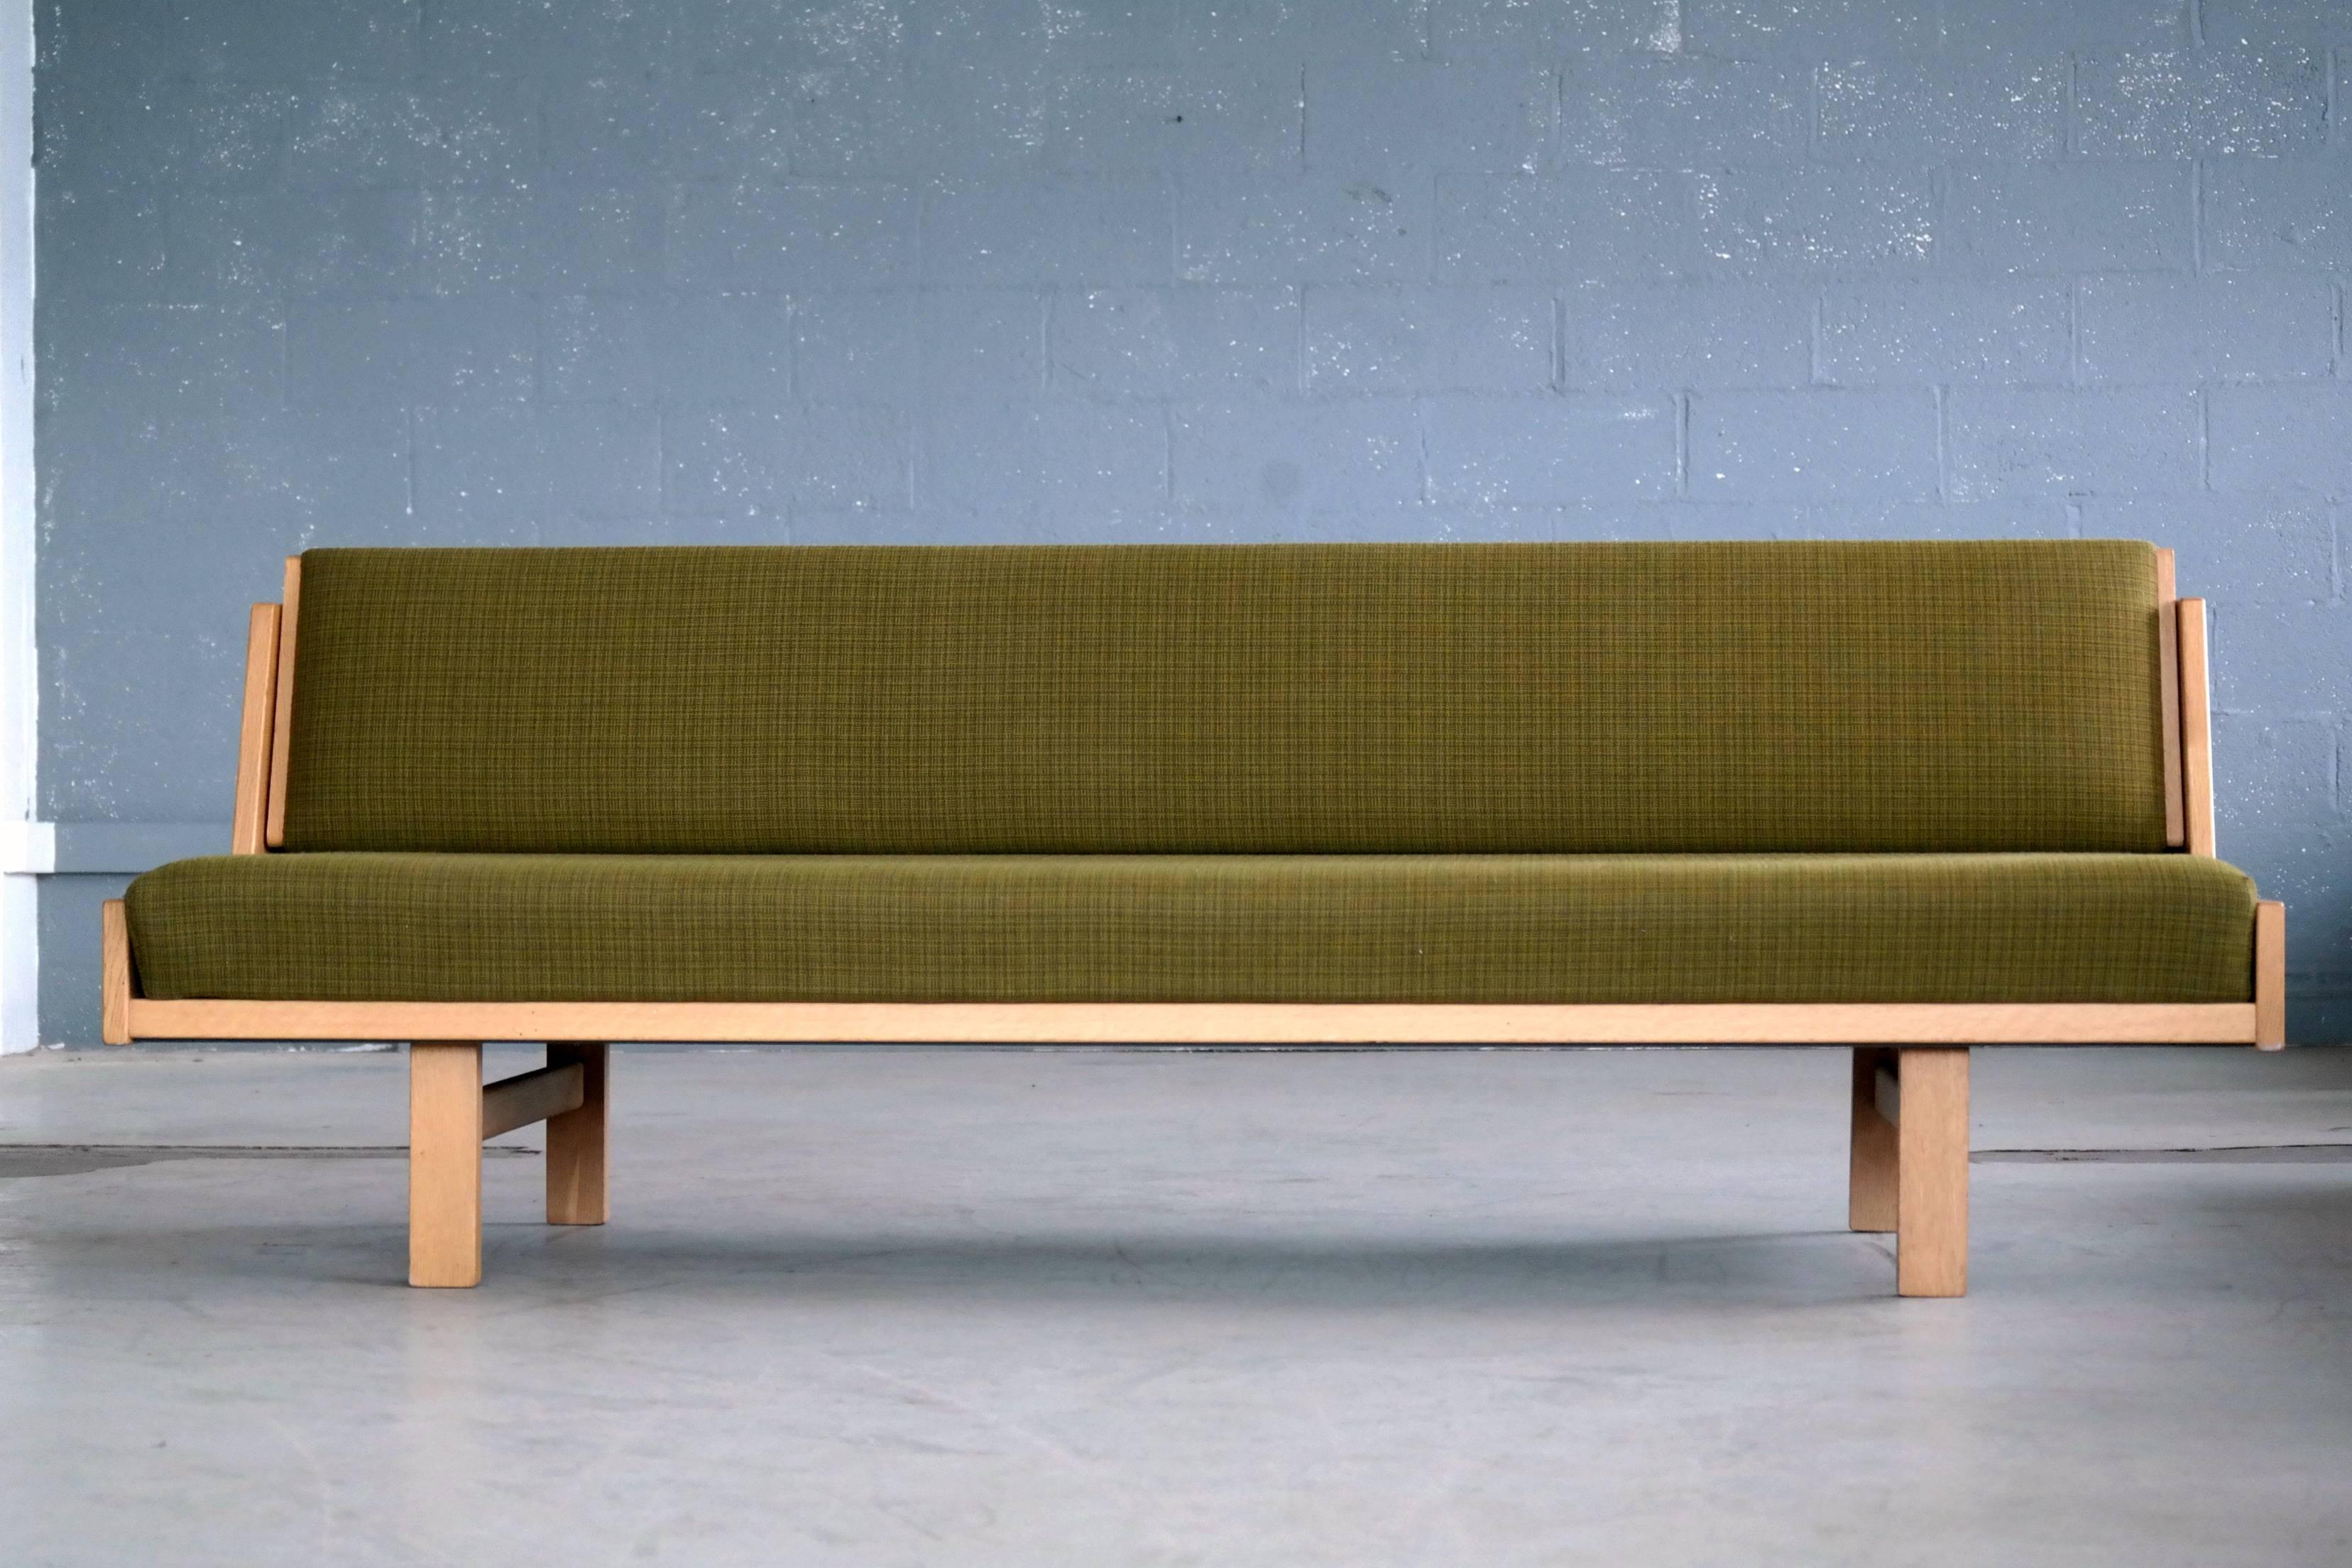 Hans Wegner's iconic daybed designed in 1954 and produced by GETAMA in Denmark. The daybed is made from oak veneer raised on solid oak legs and has it's original spring loaded mattress covered in a green wool by Kvadrat. The backrest which also